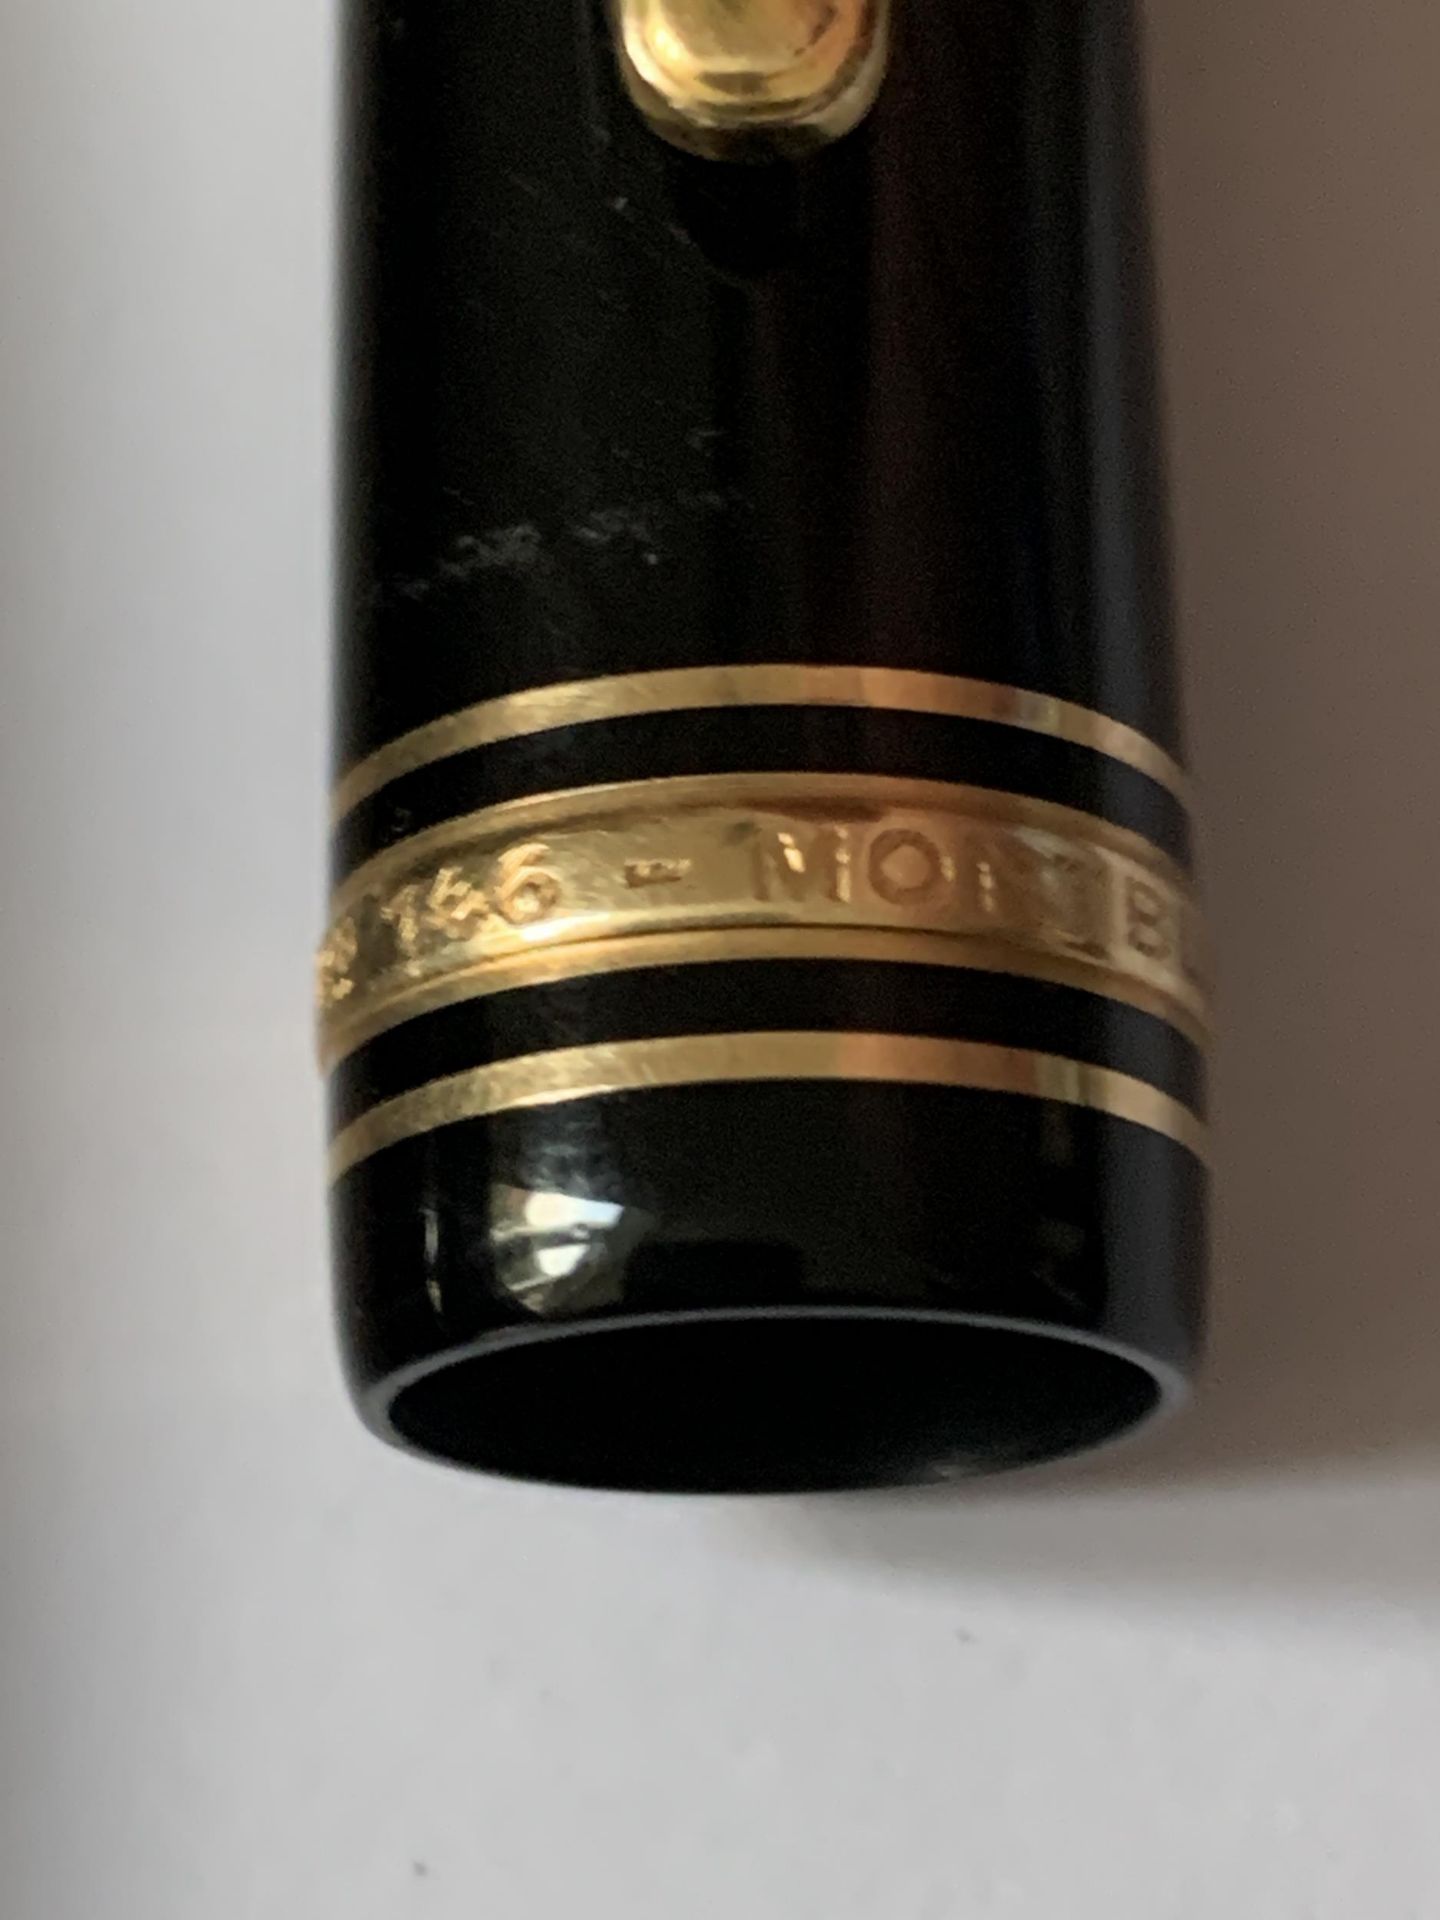 A MONT BLANC MEISTERSTUCK GOLD COATED LE GRAND FOUNTAIN PEN WITH 18 CARAT GOLD MEDIUM NIB - Image 7 of 8